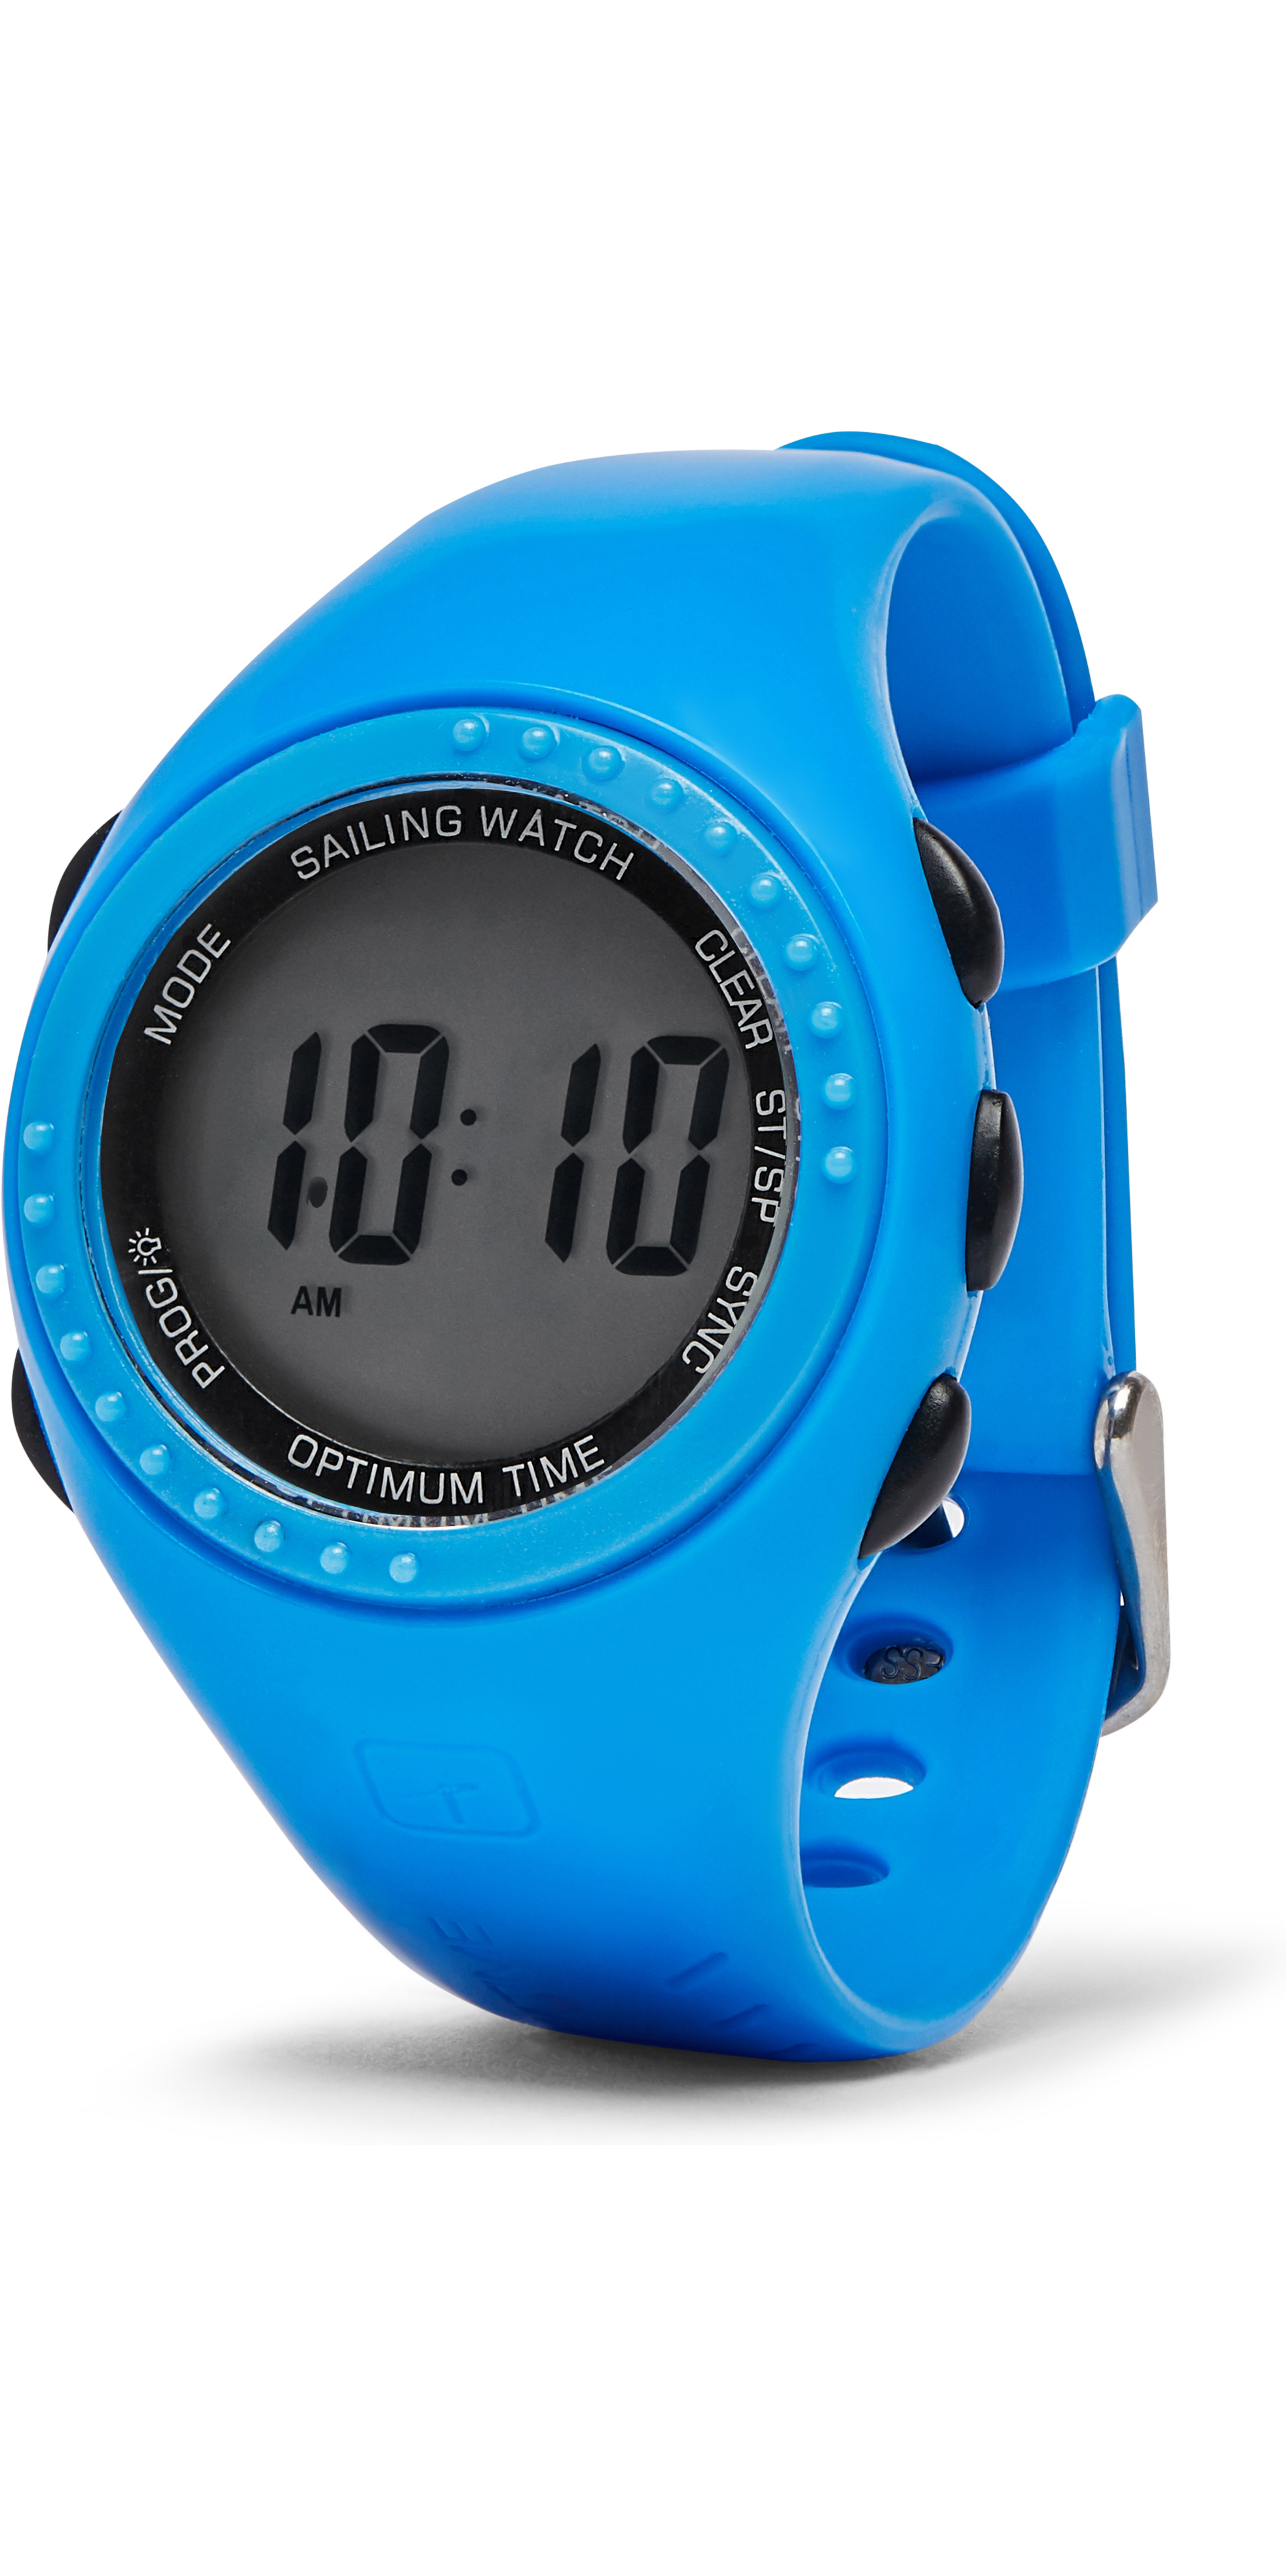 2022 Optimum Time Series 11 Sailing Watch OS112 Blue Sailing  Accessories Wetsuit Outlet